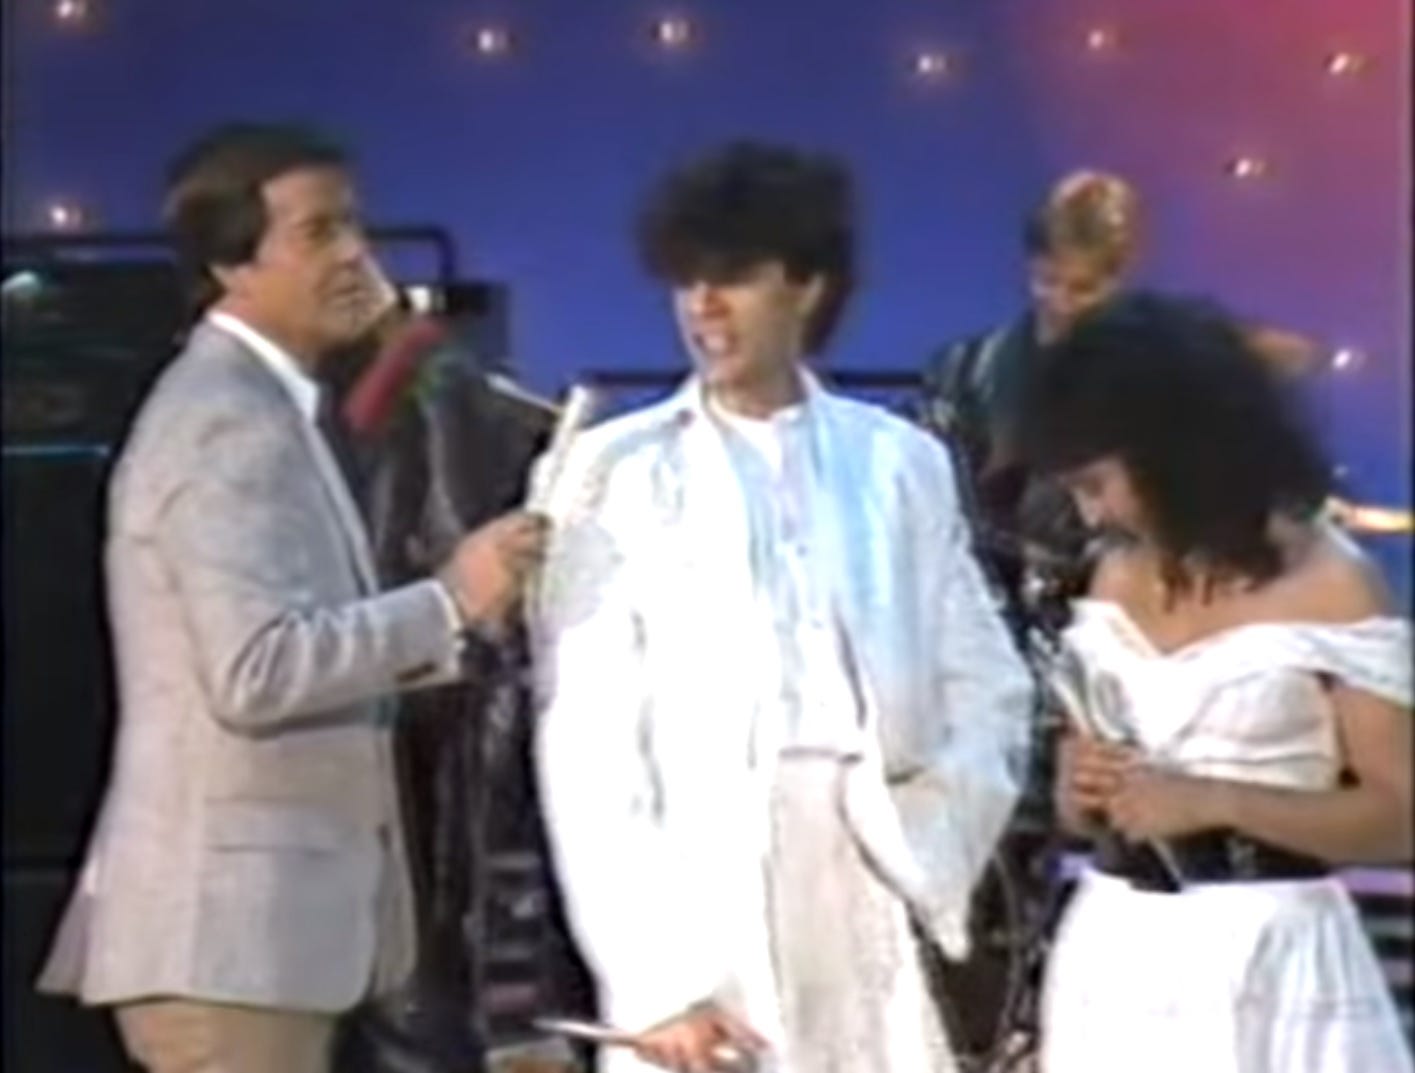 Russell and Jane interview by Dick Clark on American Bandstand.